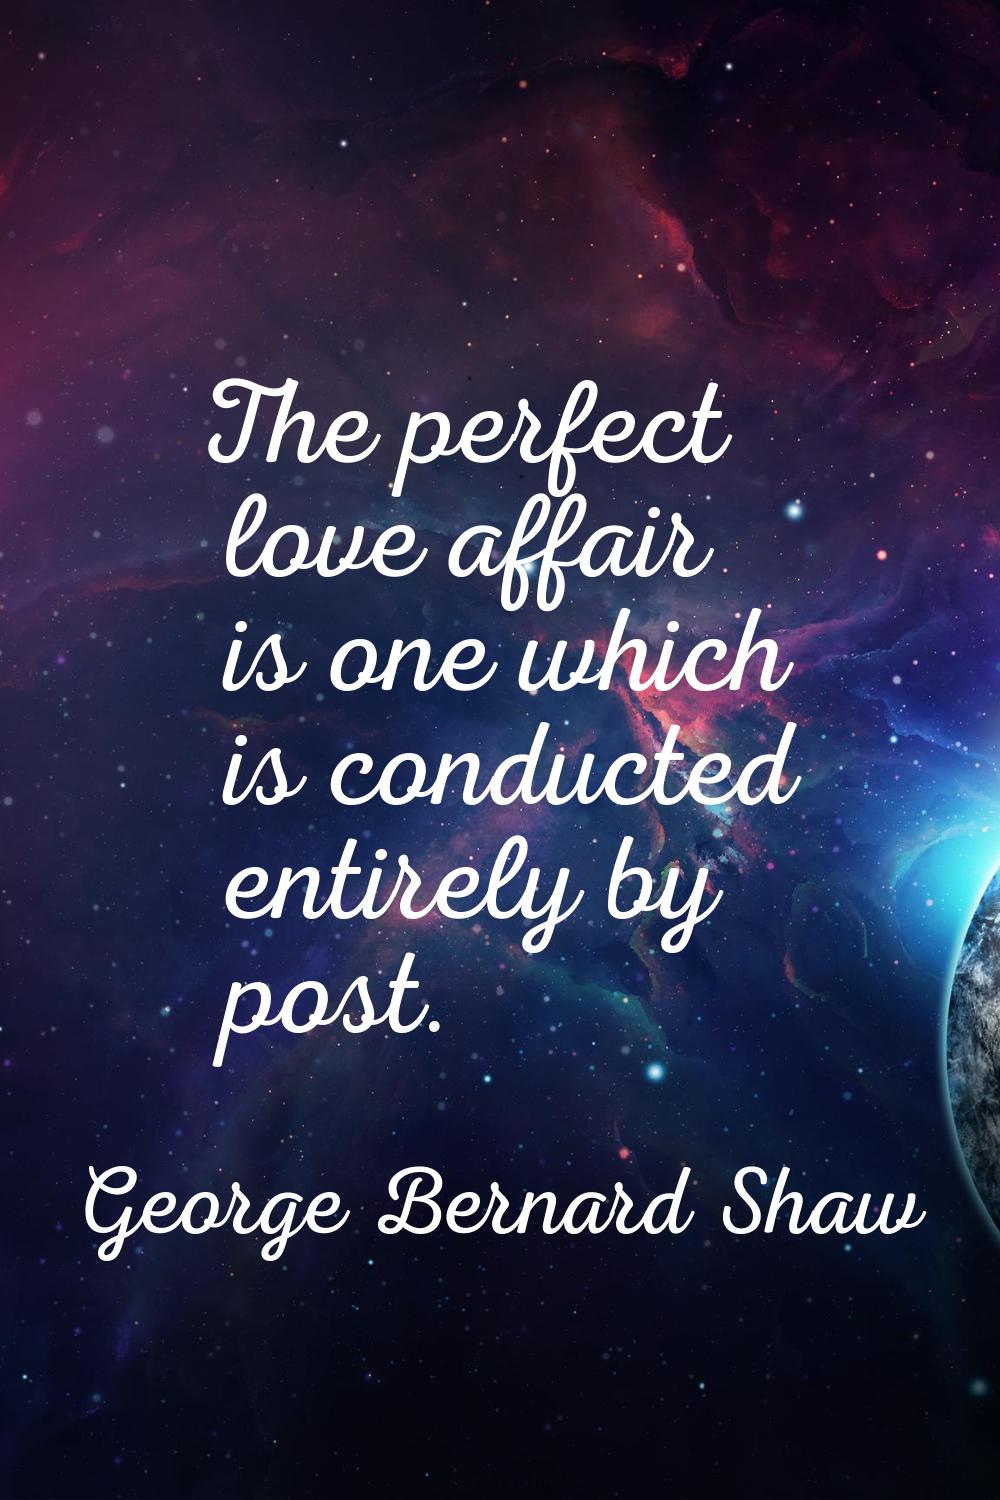 The perfect love affair is one which is conducted entirely by post.